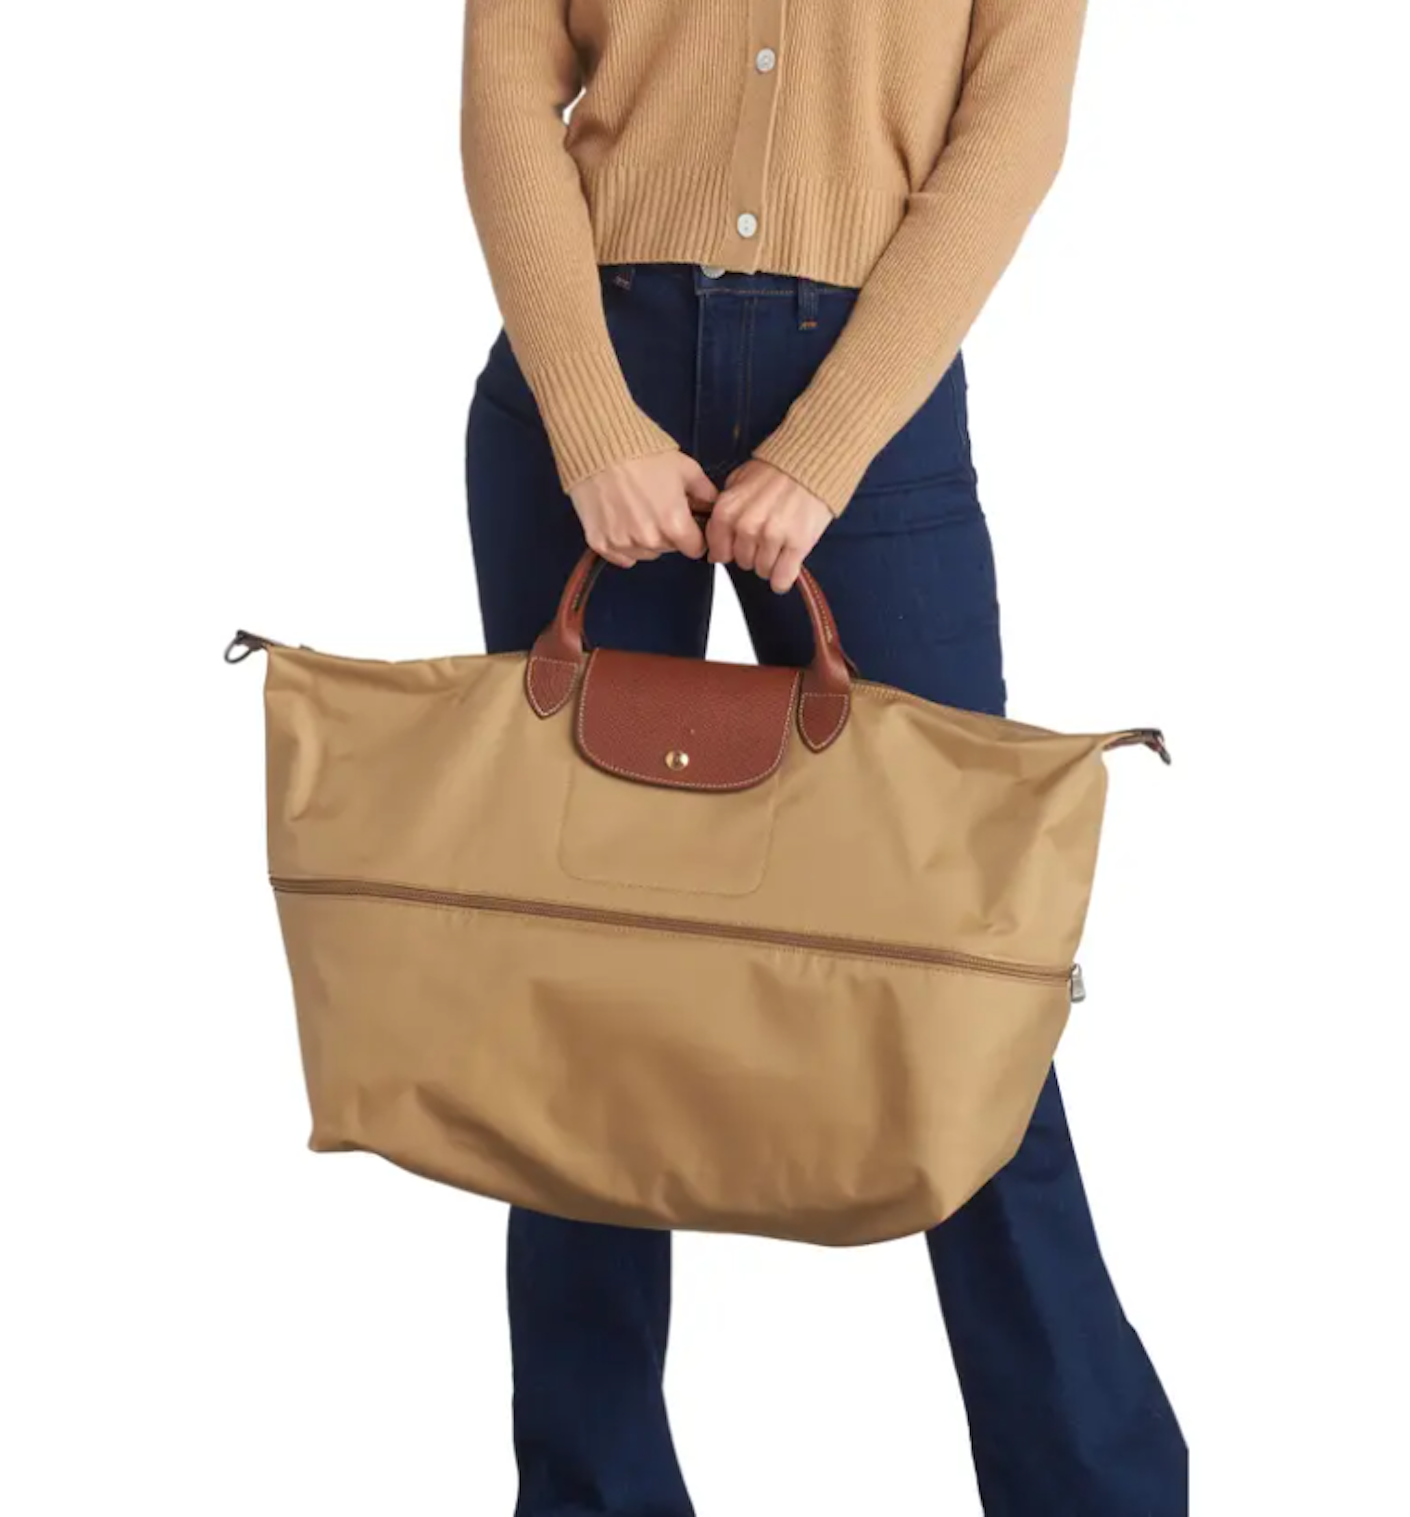 A person carries a large, soft, expandable, light brown bag.